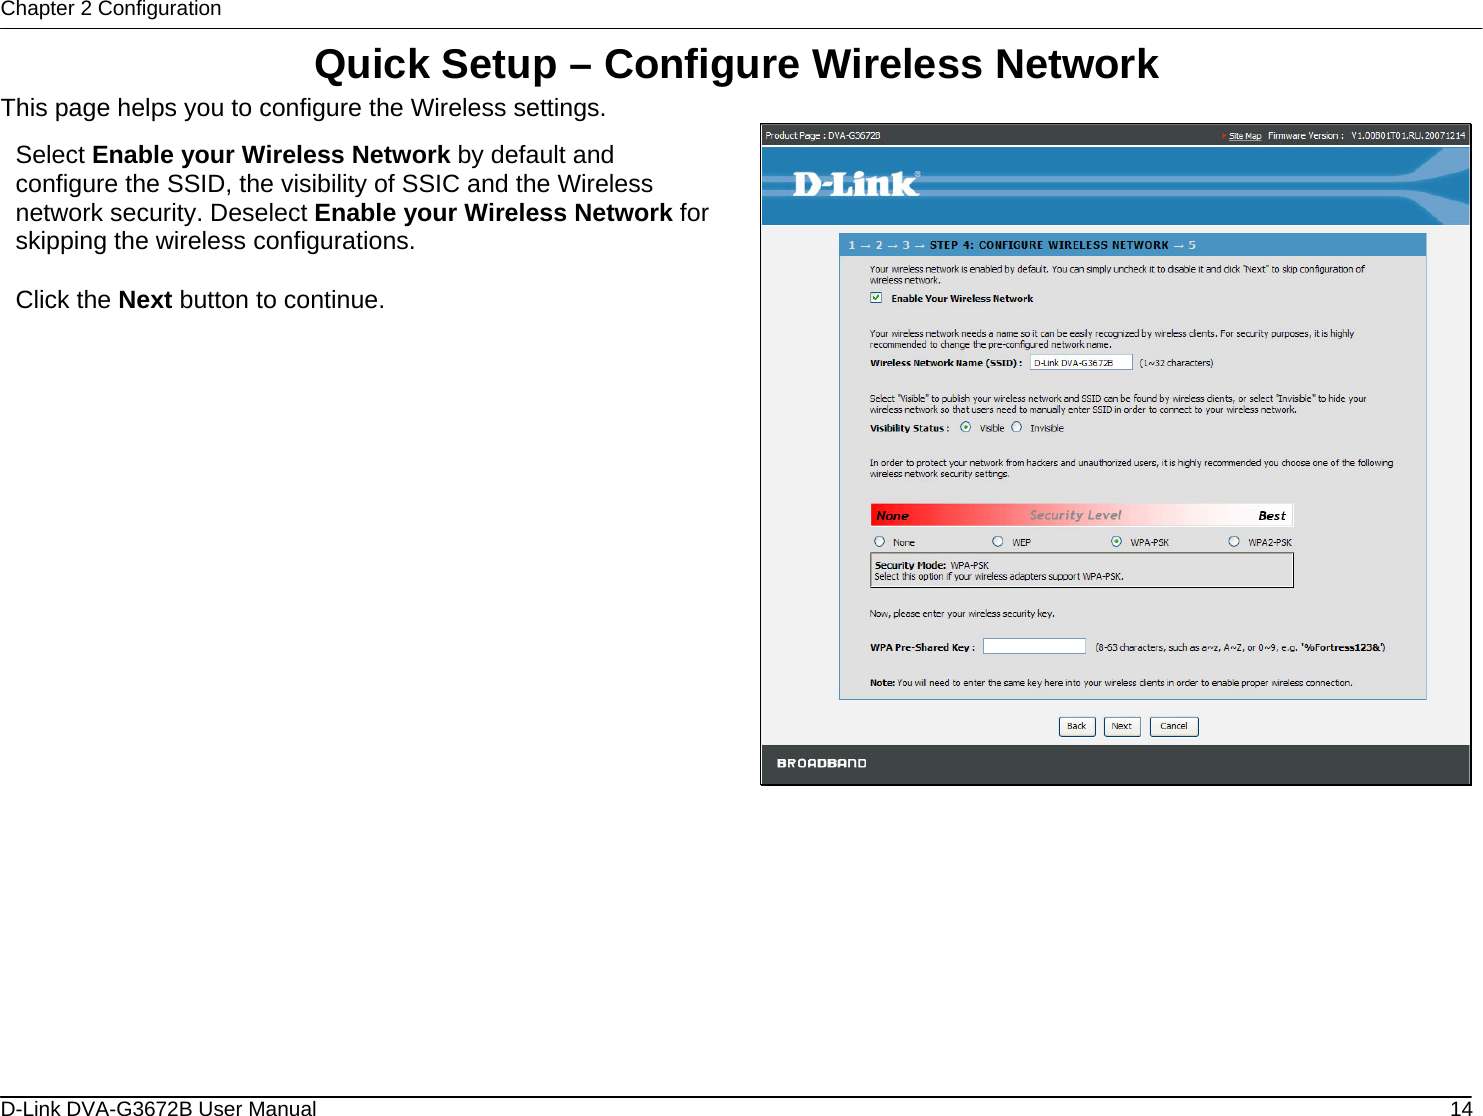 Chapter 2 Configuration Quick Setup – Configure Wireless Network This page helps you to configure the Wireless settings.  Select Enable your Wireless Network by default and configure the SSID, the visibility of SSIC and the Wireless network security. Deselect Enable your Wireless Network for skipping the wireless configurations.  Click the Next button to continue.           D-Link DVA-G3672B User Manual  14